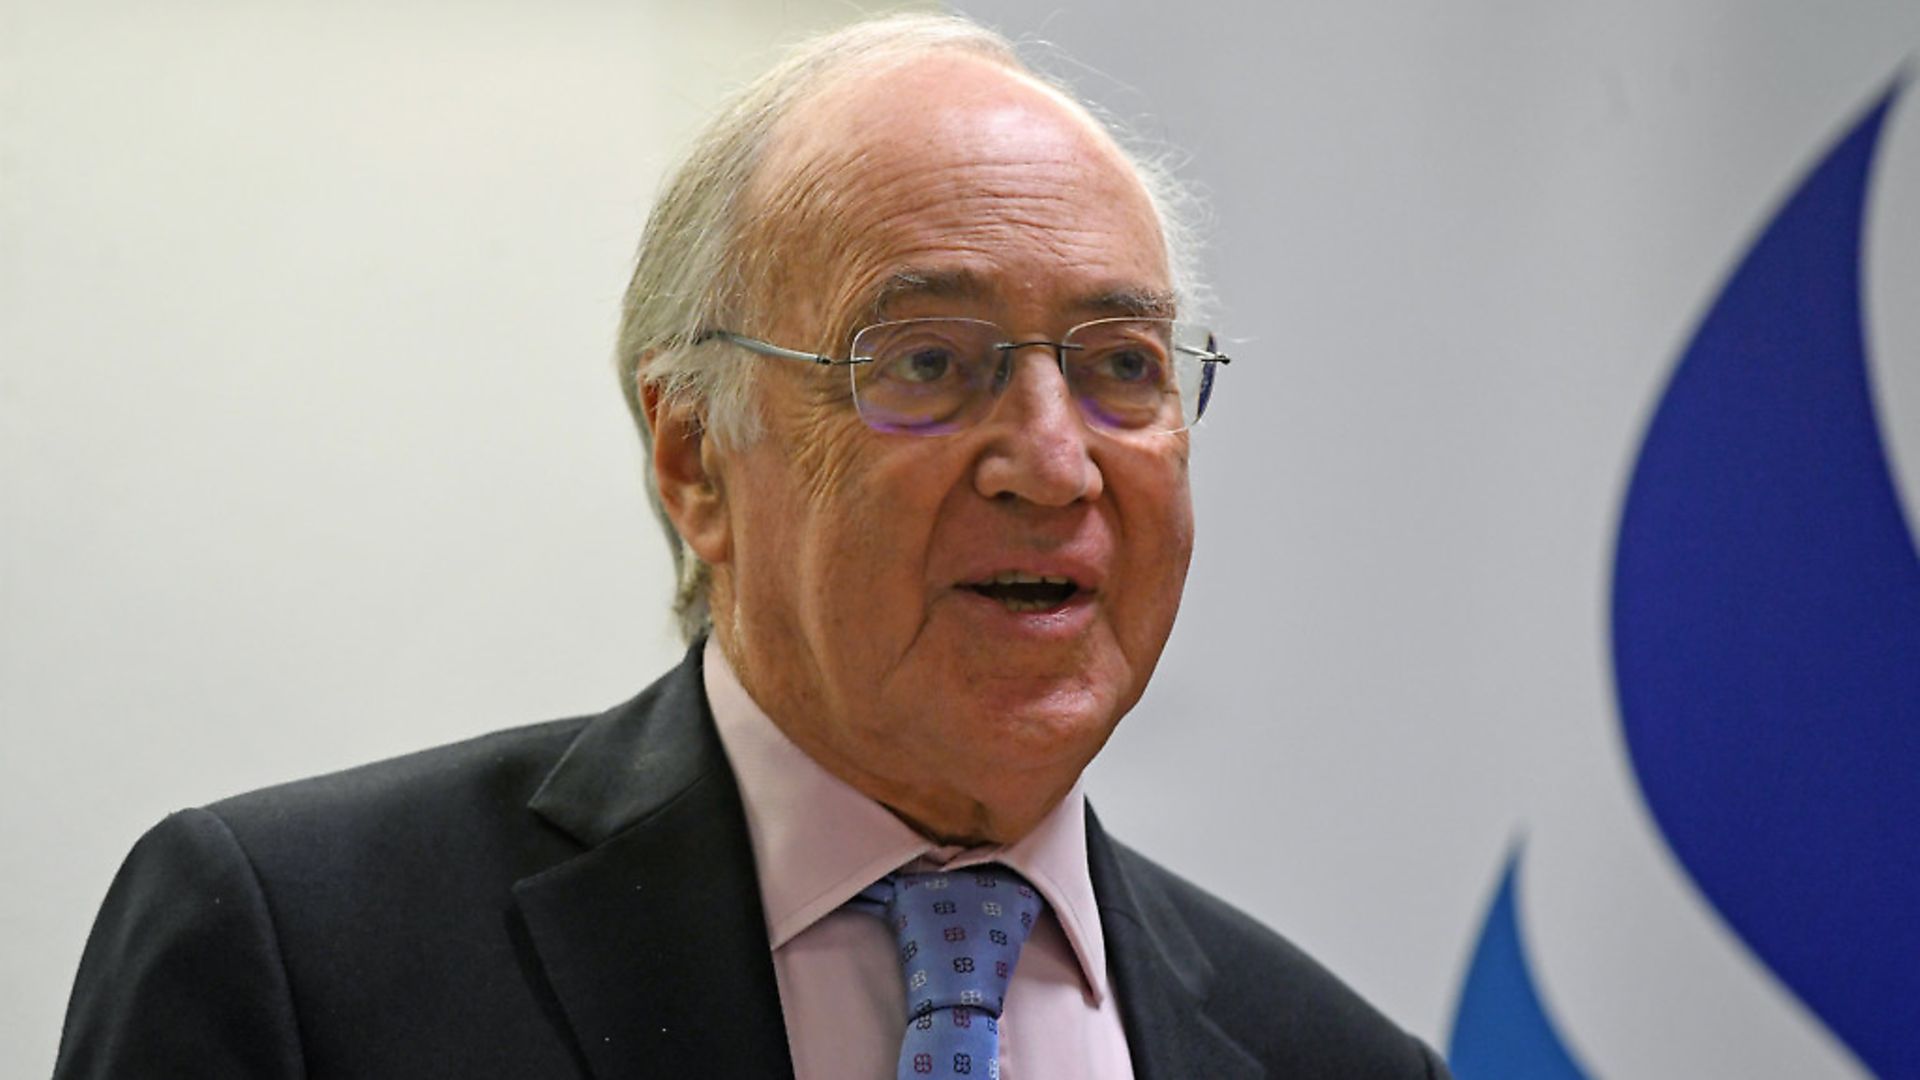 Lord Michael Howard during a Brexit and the Future conference at the BPP University in central London. - Credit: PA Wire/PA Images